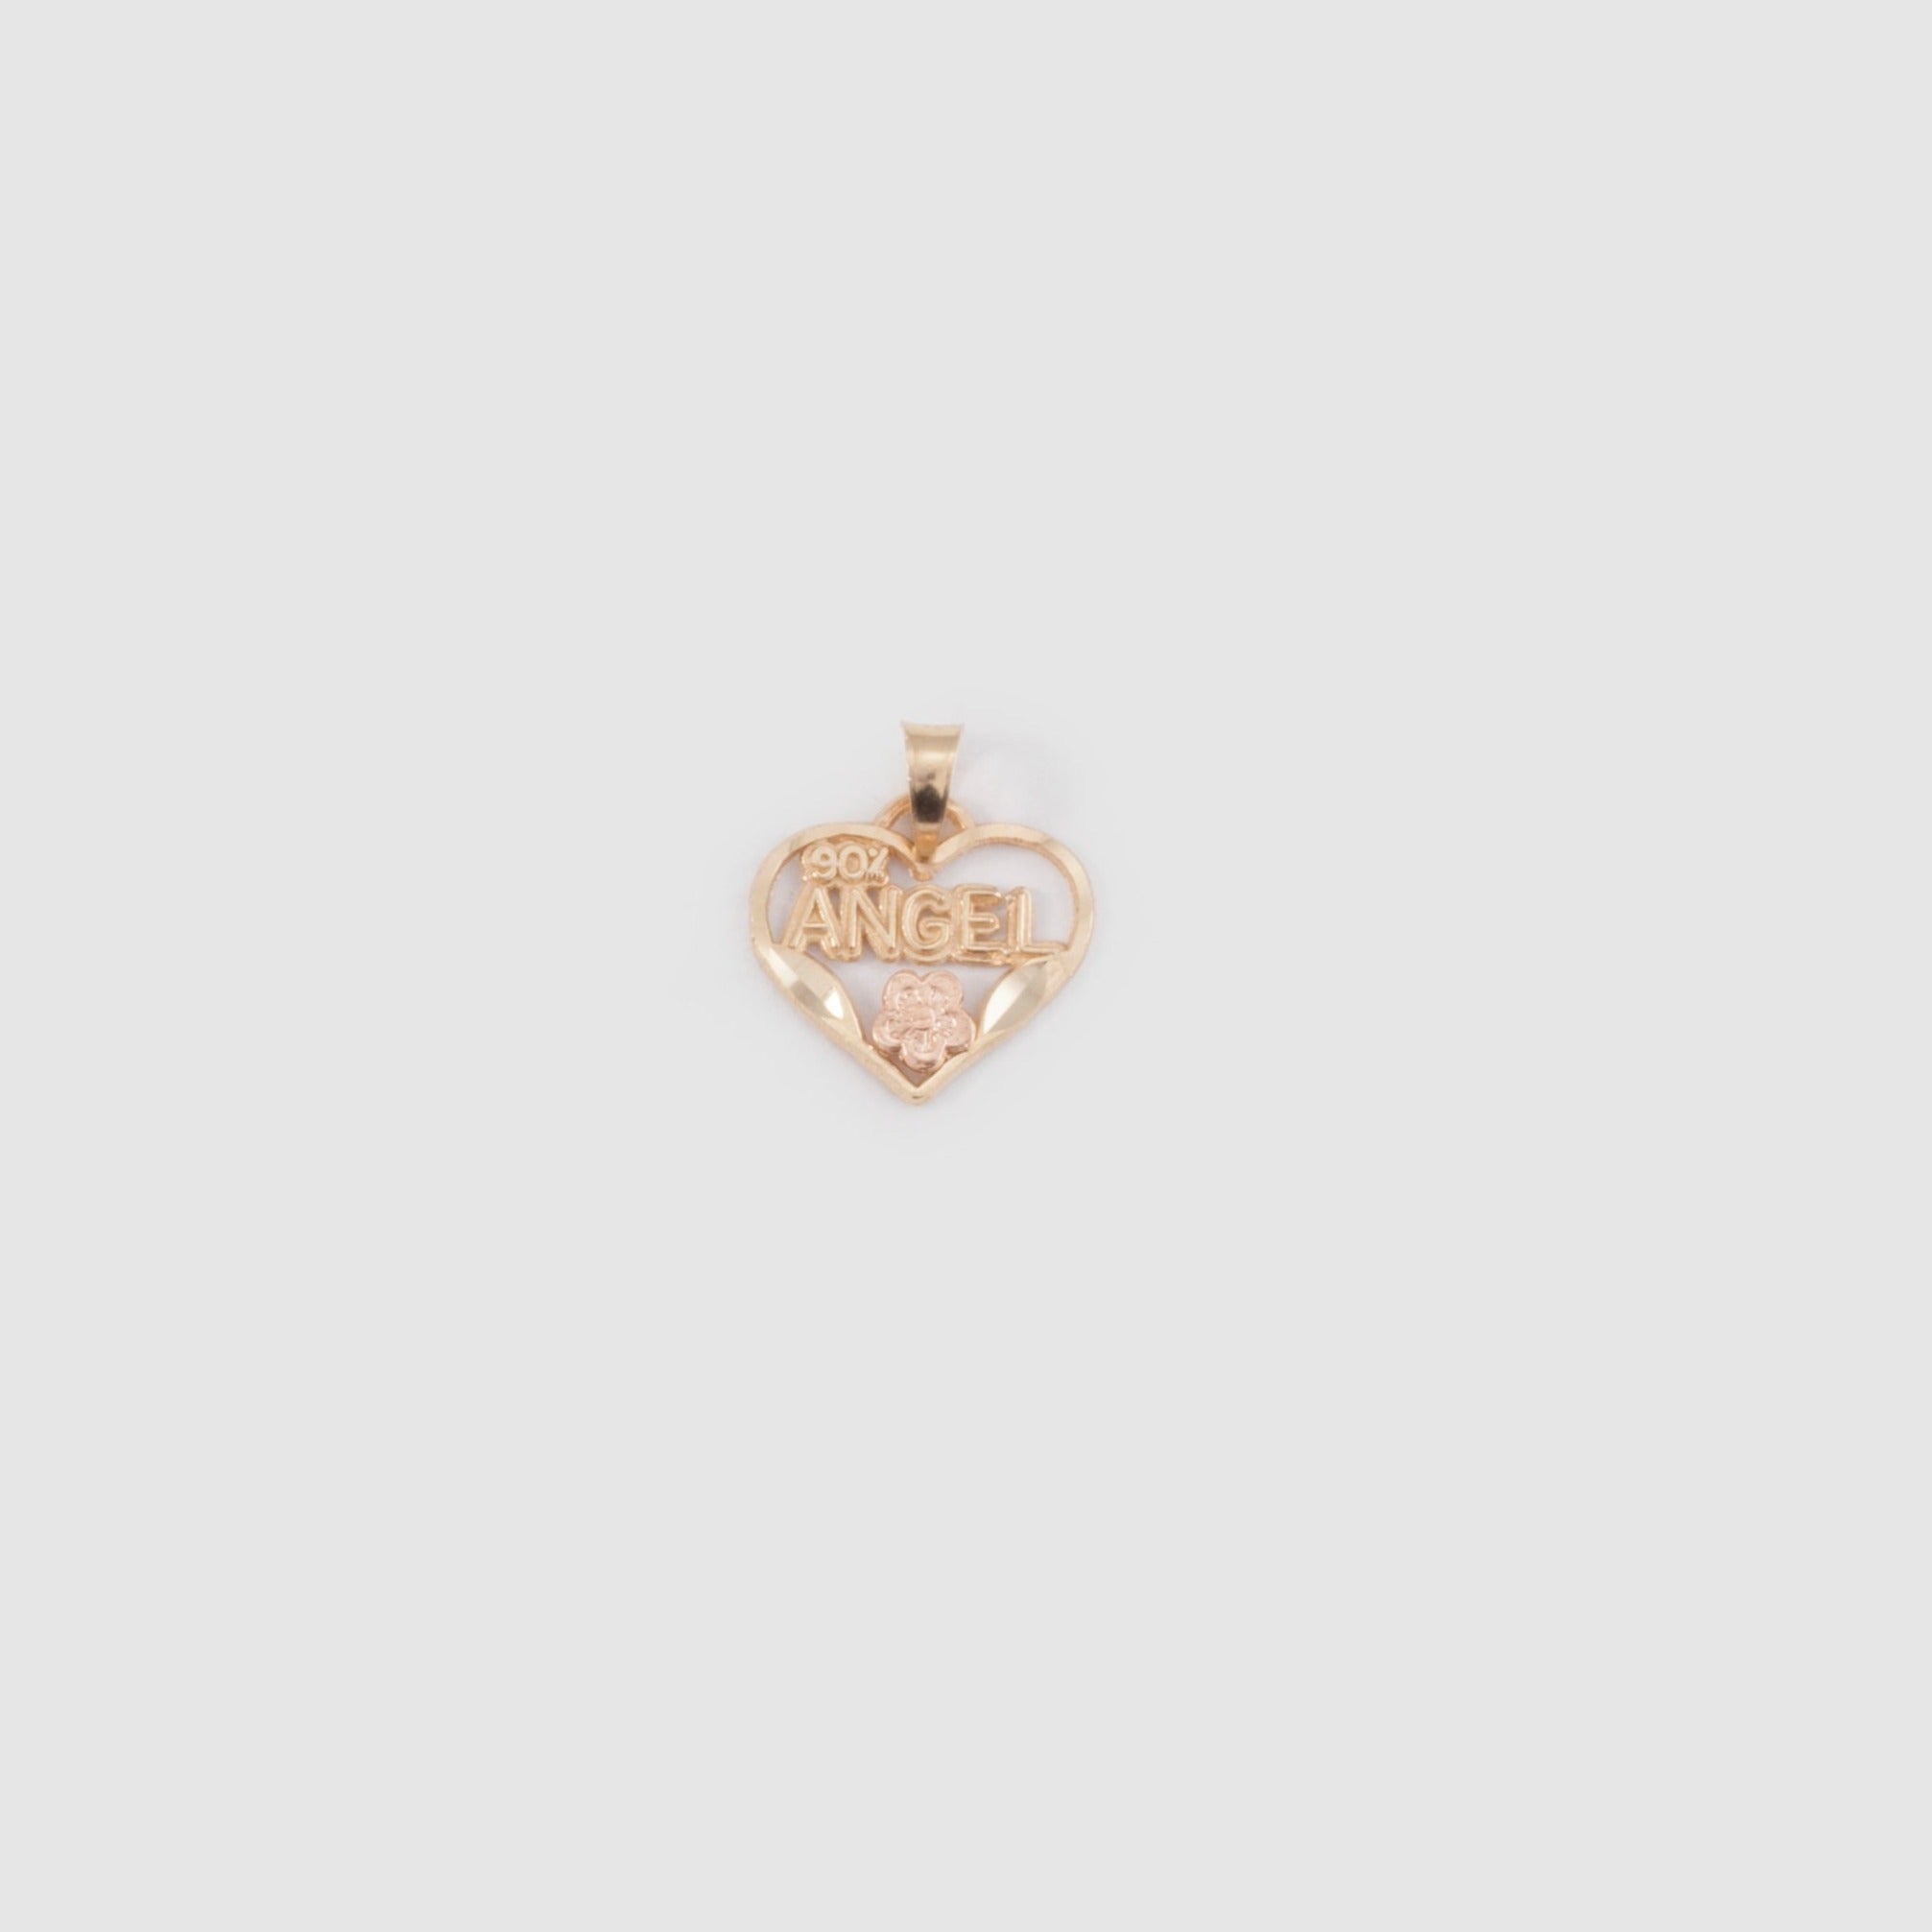 Gold heart-shaped pendant featuring "90% ANGEL" text with small pink flower detail.